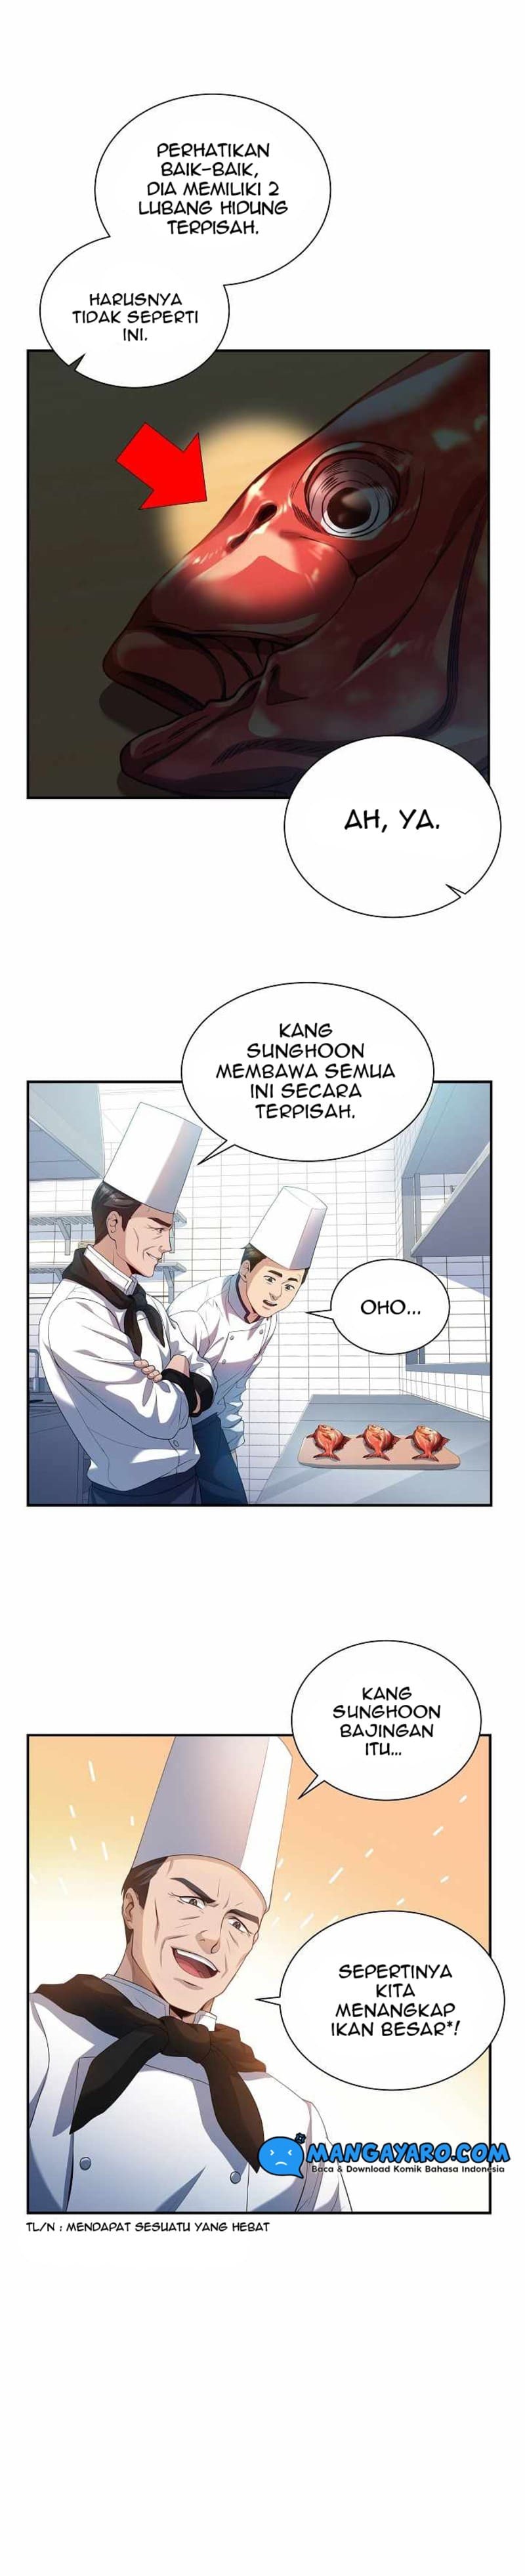 Youngest Chef From the 3rd Rate Hotel Chapter 3